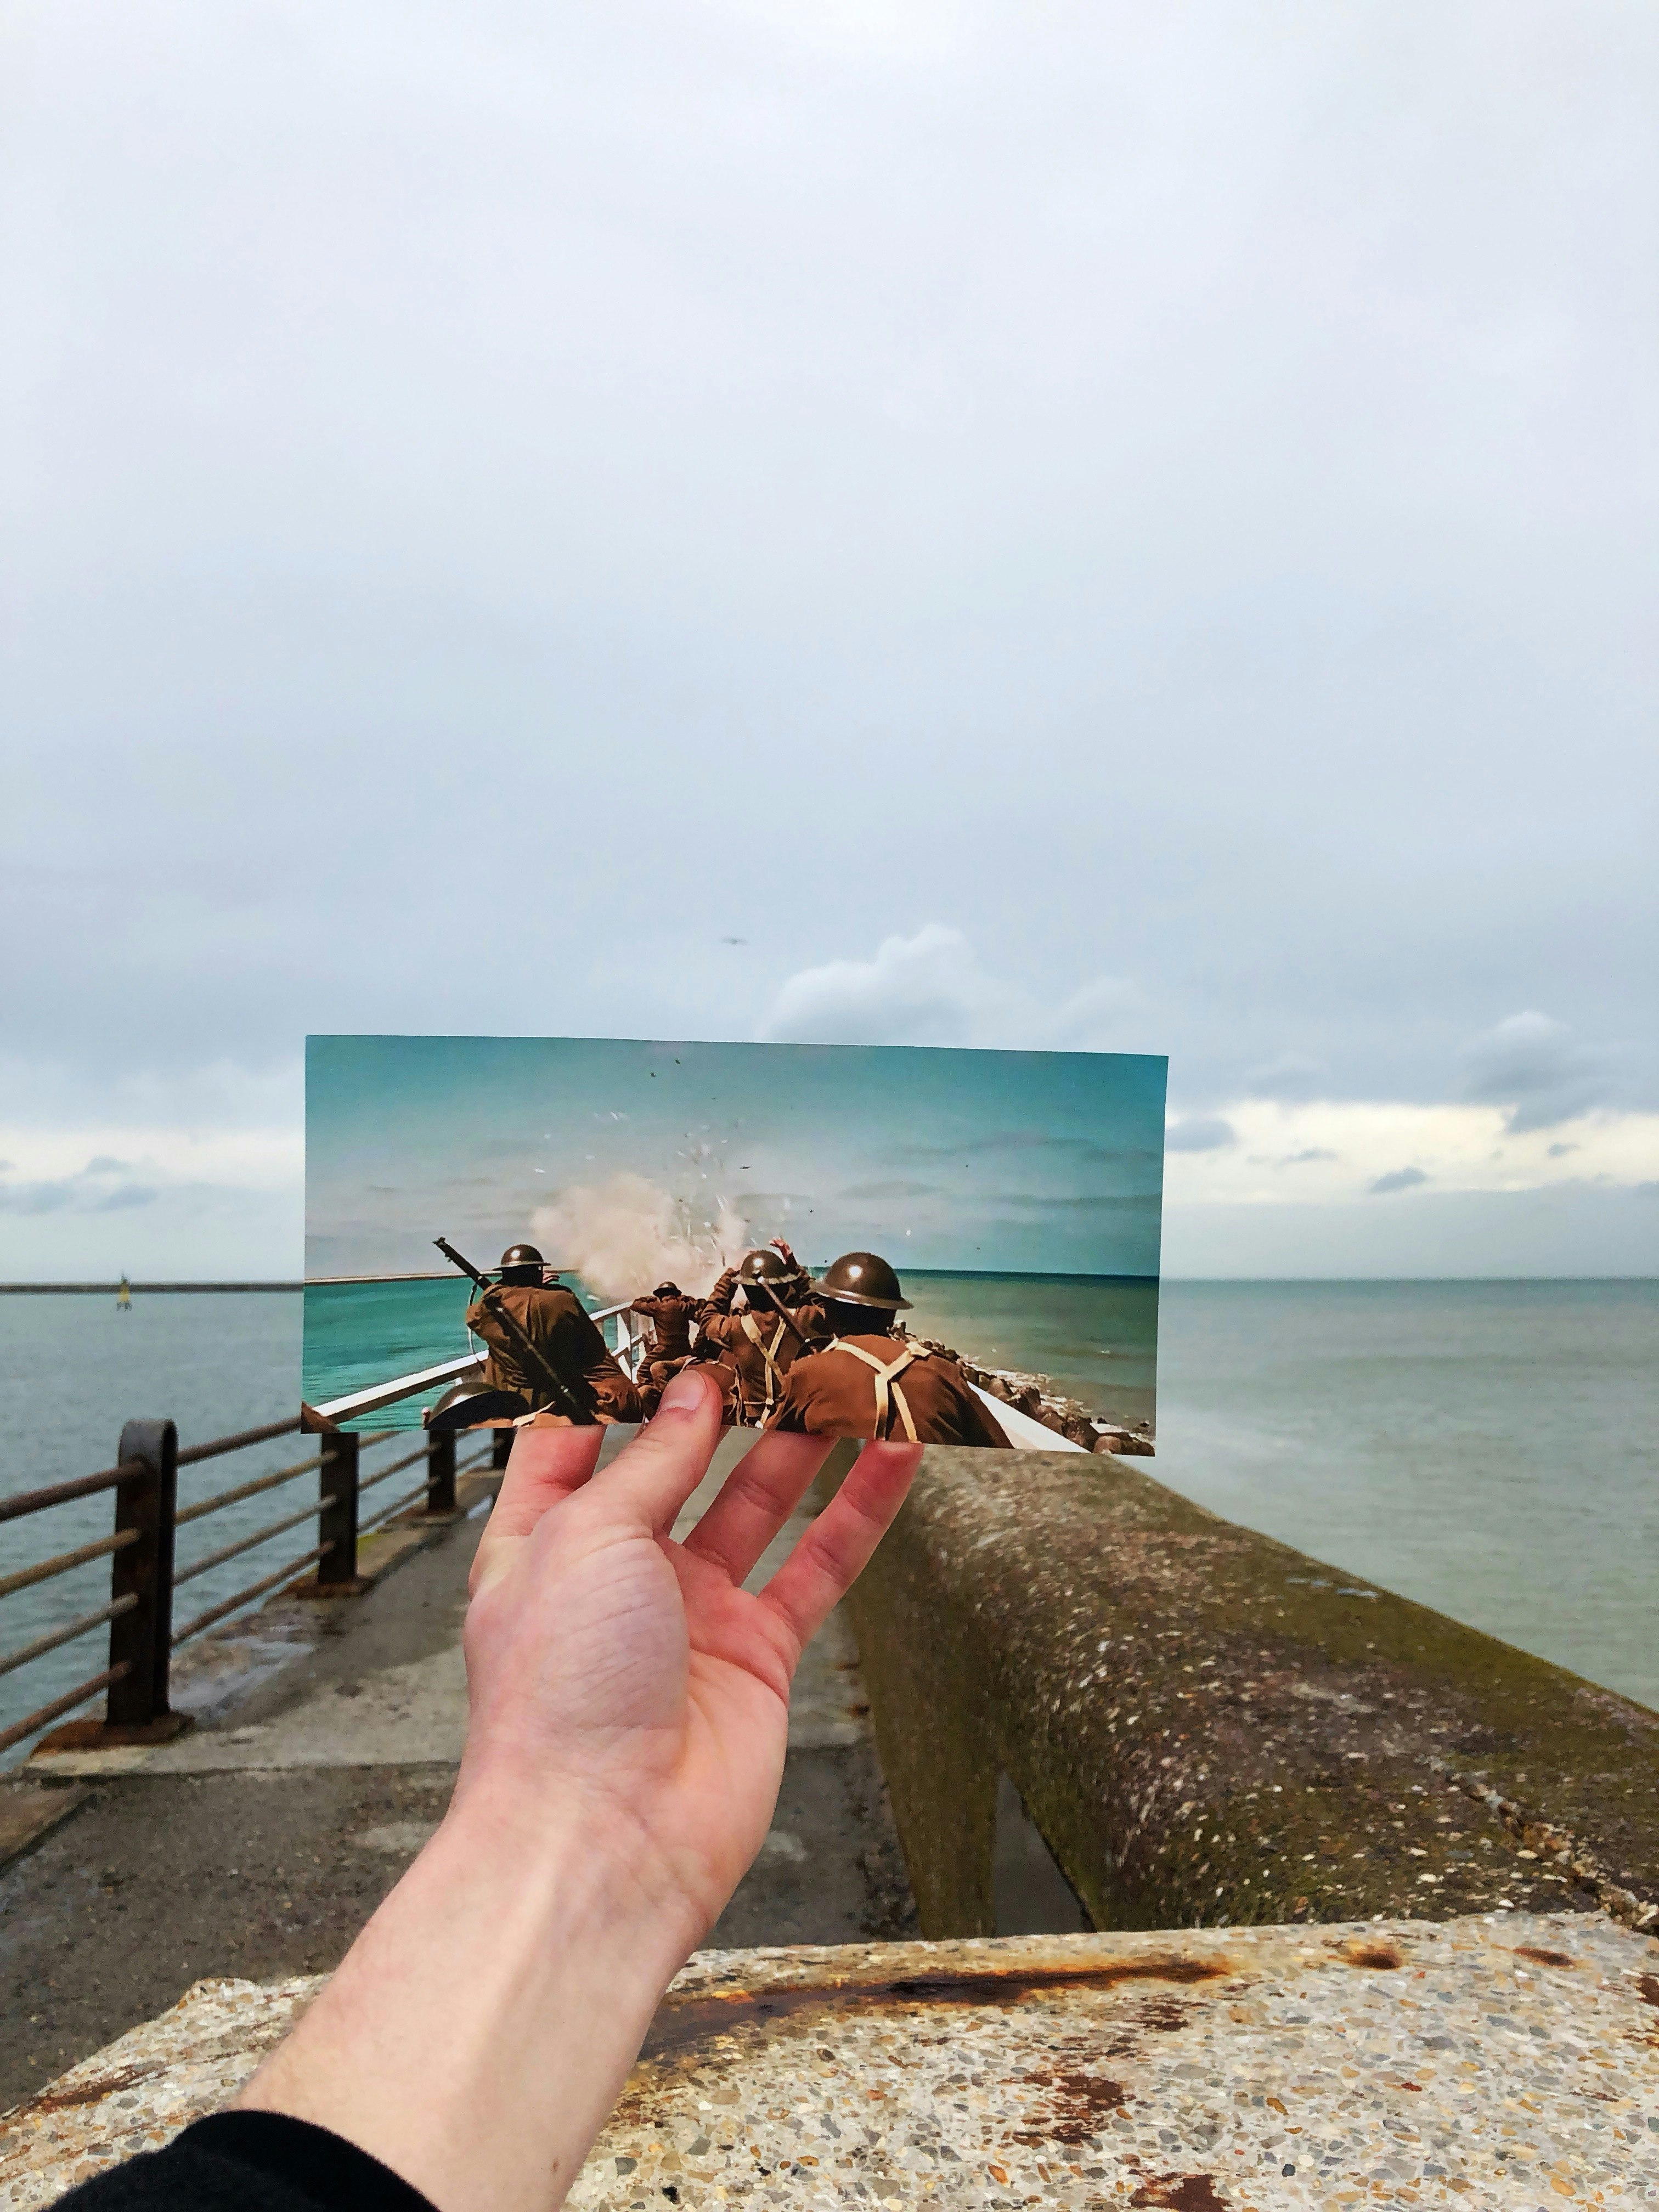 A shot taken from the movie Dunkirk lined up at the actual beach in Normandy